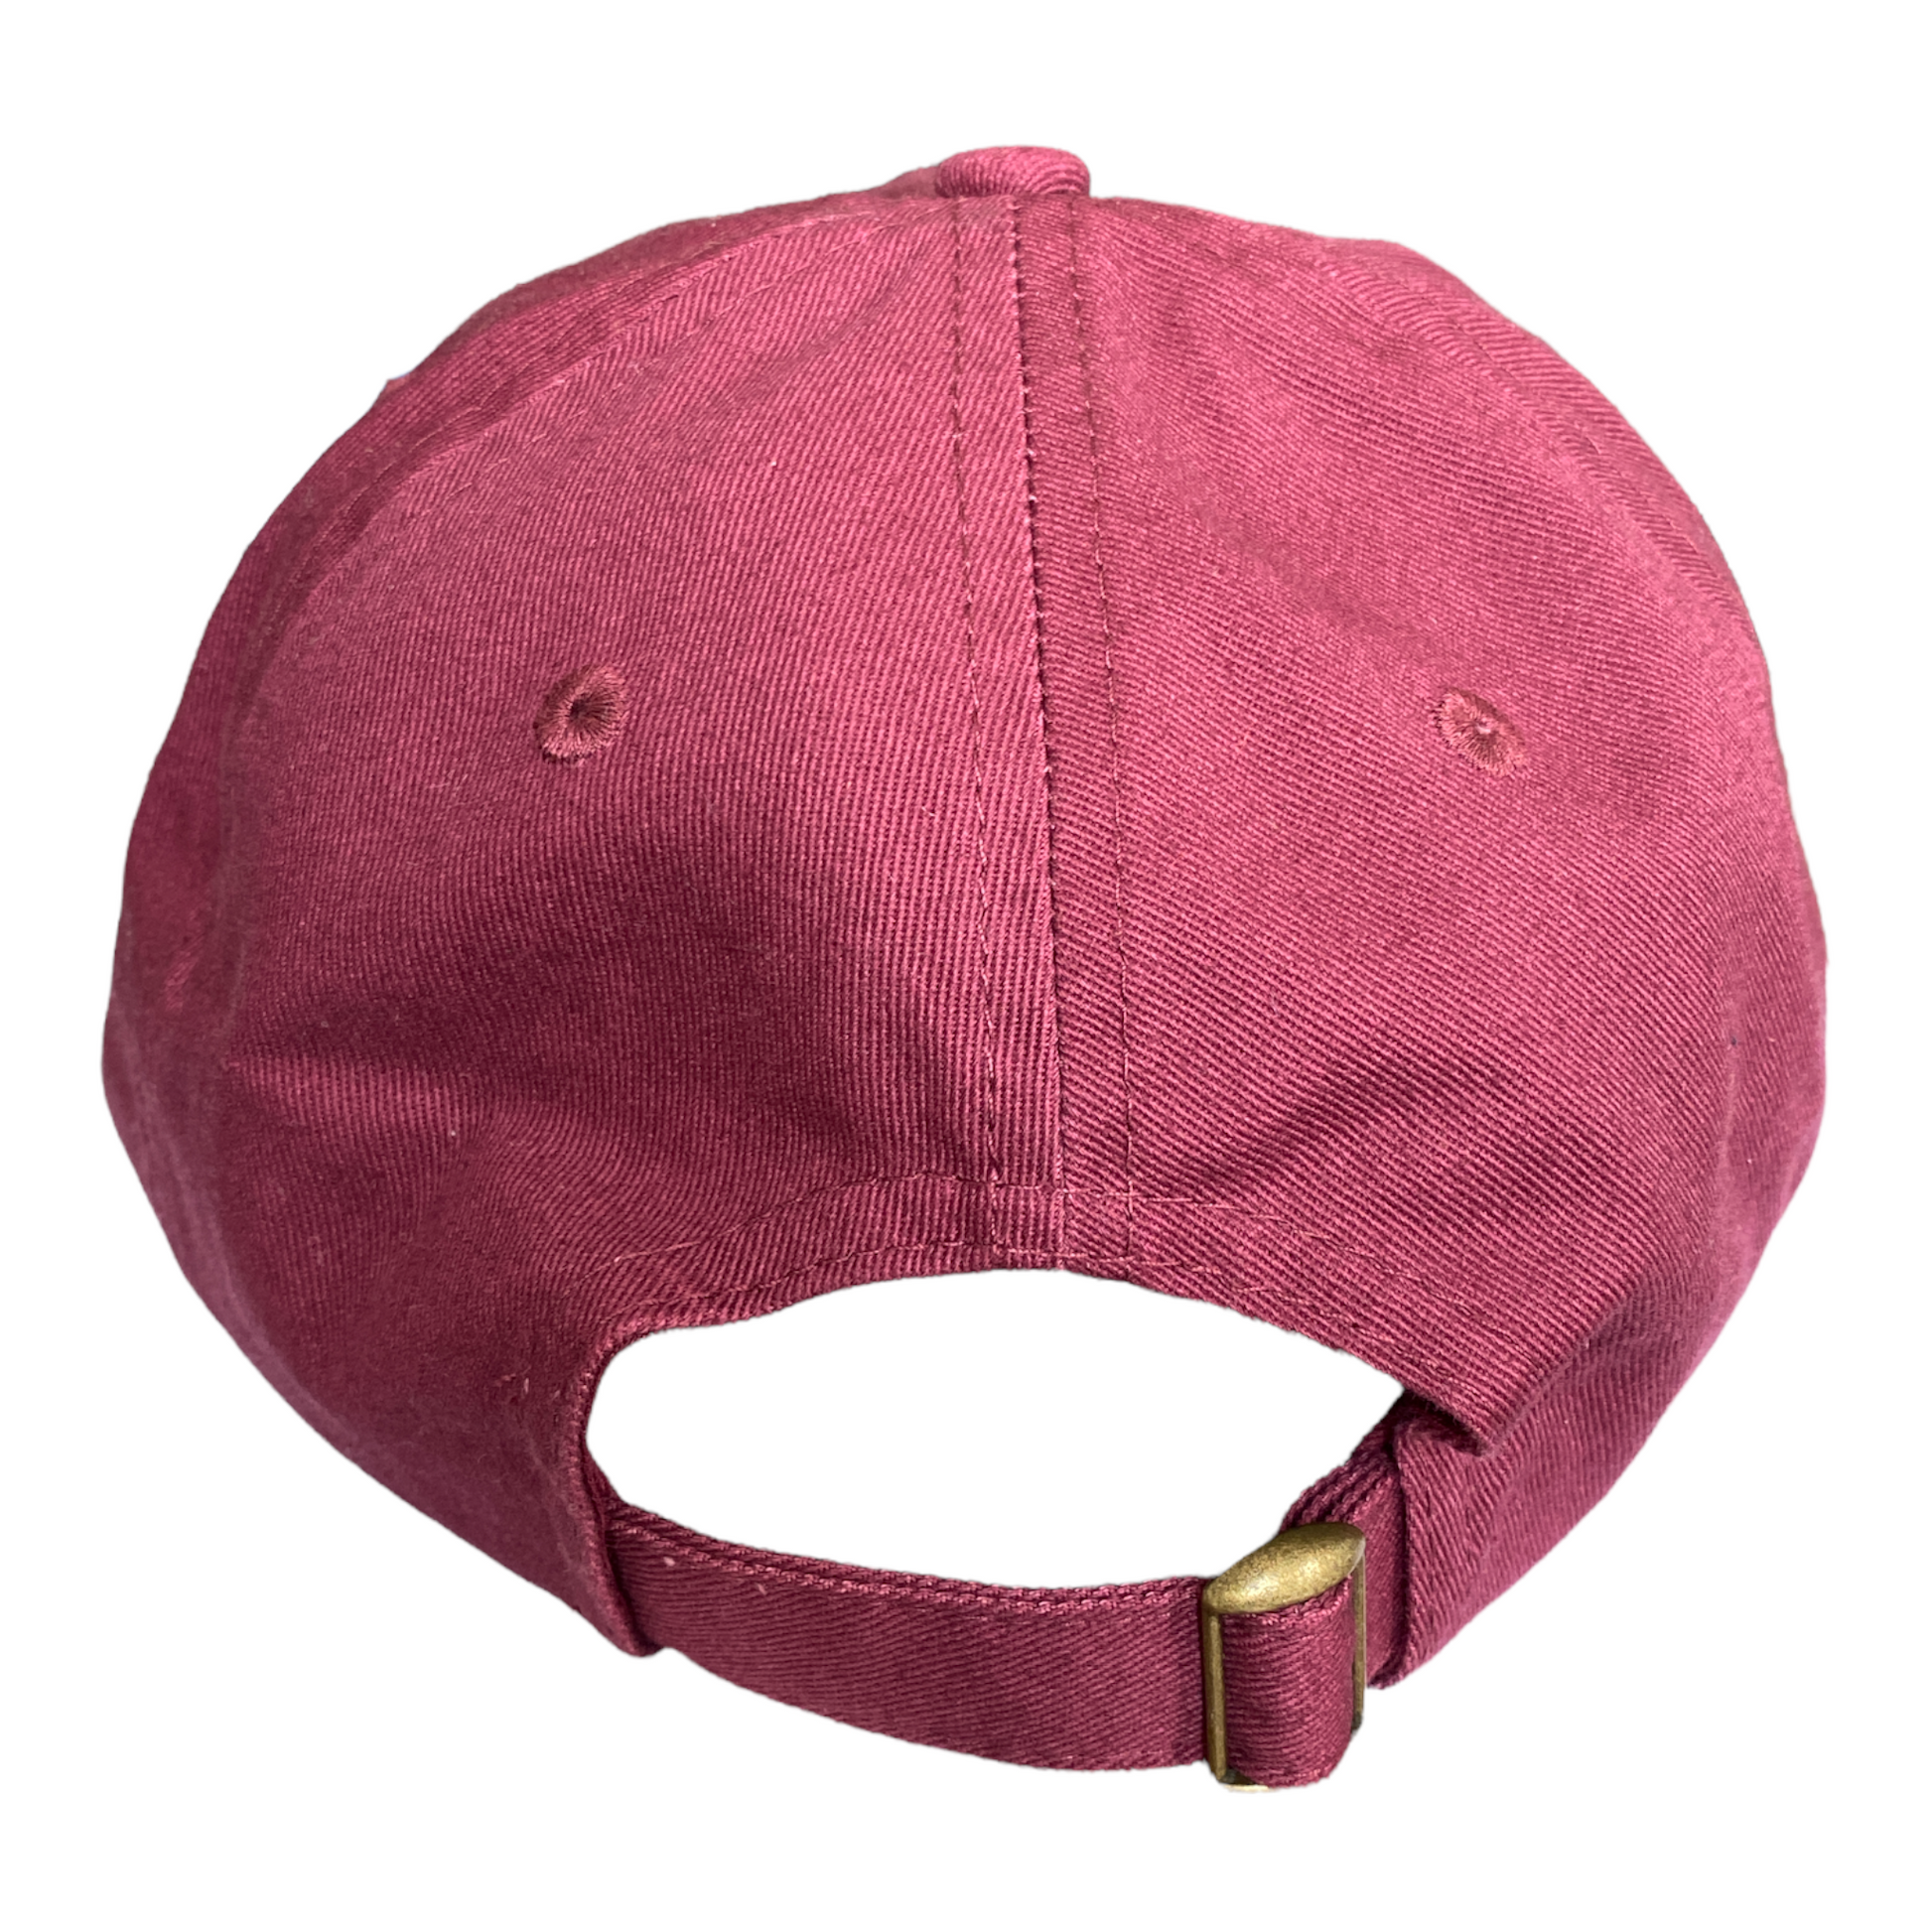 **New in ** Perfectly Imperfect - Burgundy Dad hat - Limited Edition only - TheSinners2Saints